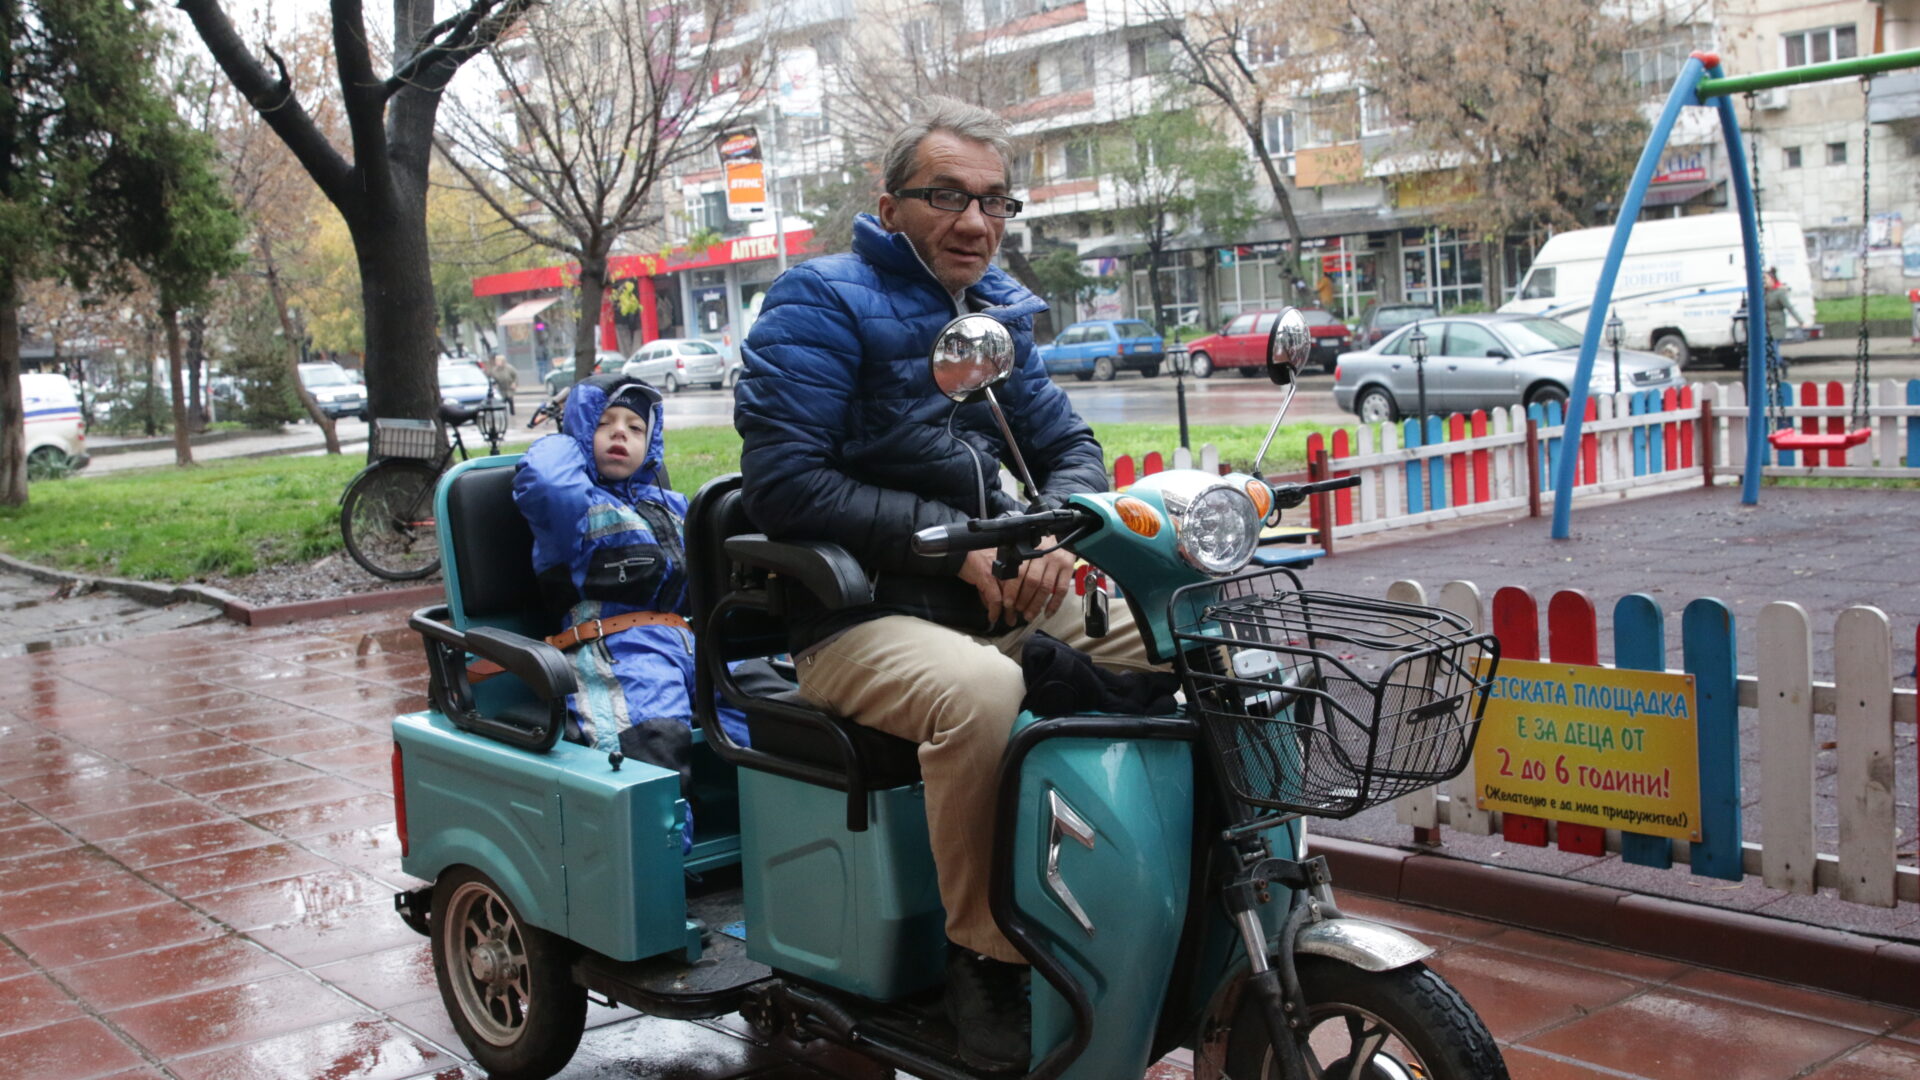 A father and his disabled son ride on a mobility scooter along a tree lined street in the rain